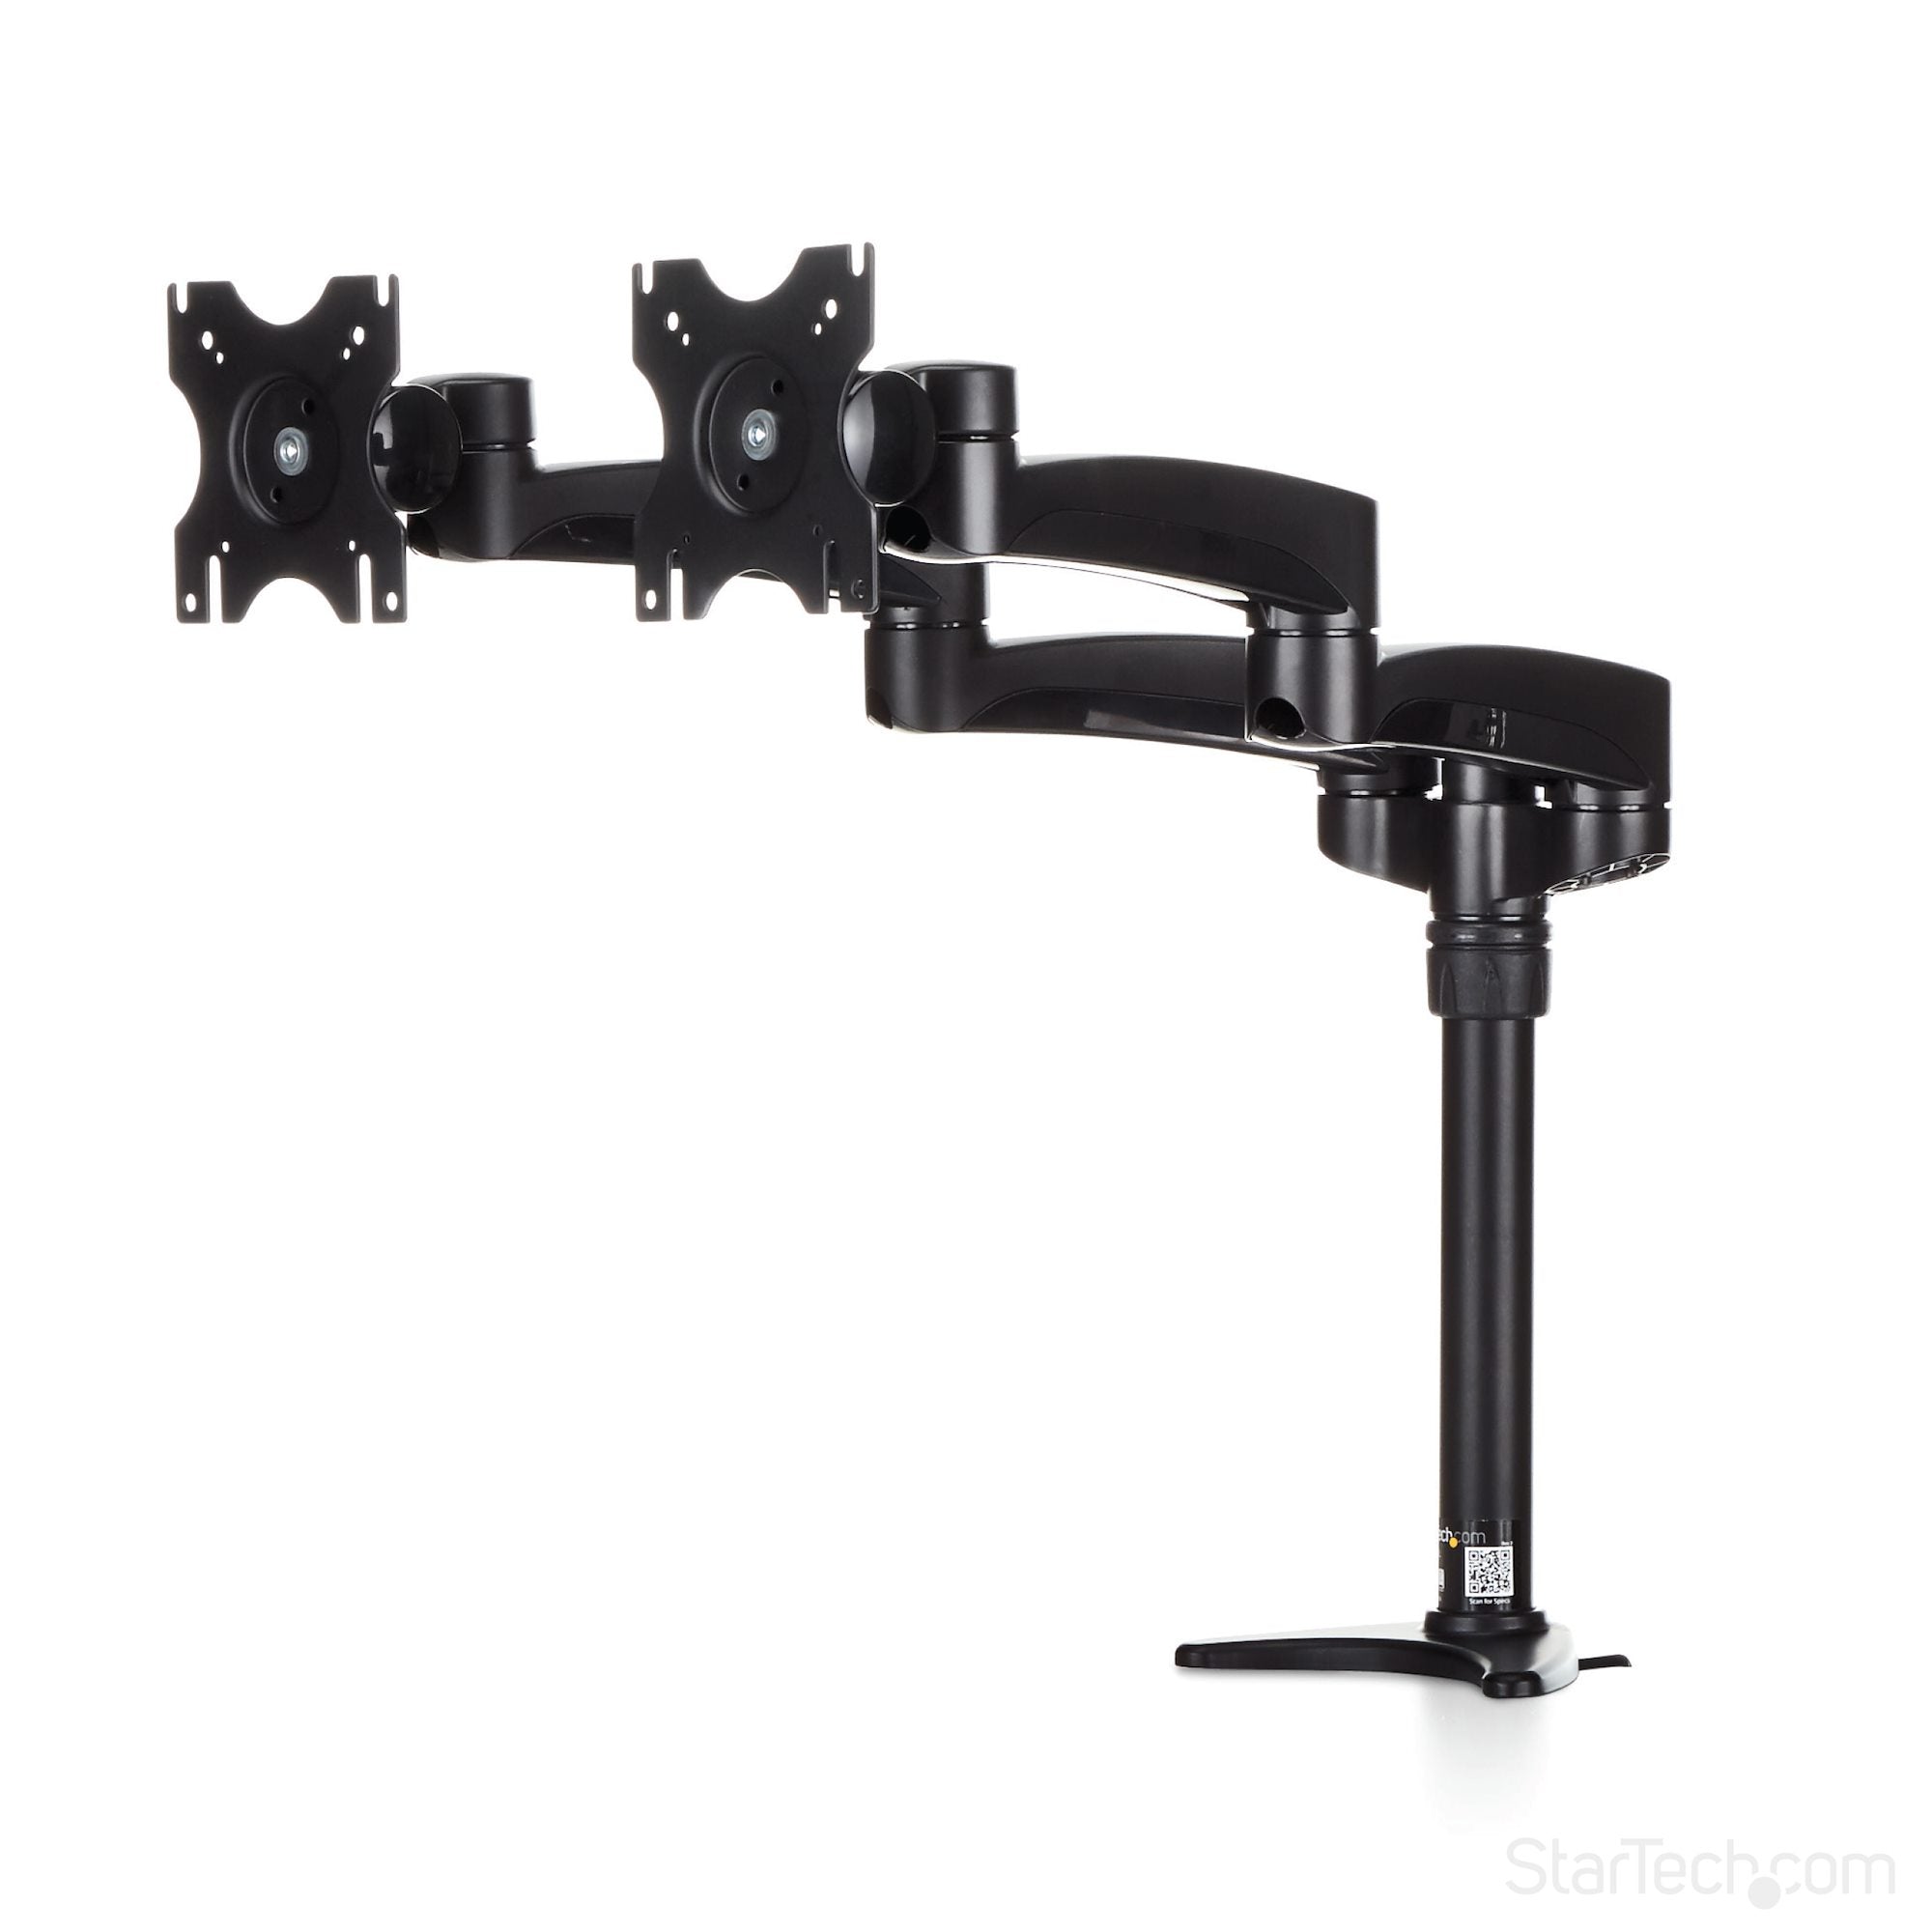 StarTech Desk Mount Dual Monitor Arm For VESA Monitors Up To 24"